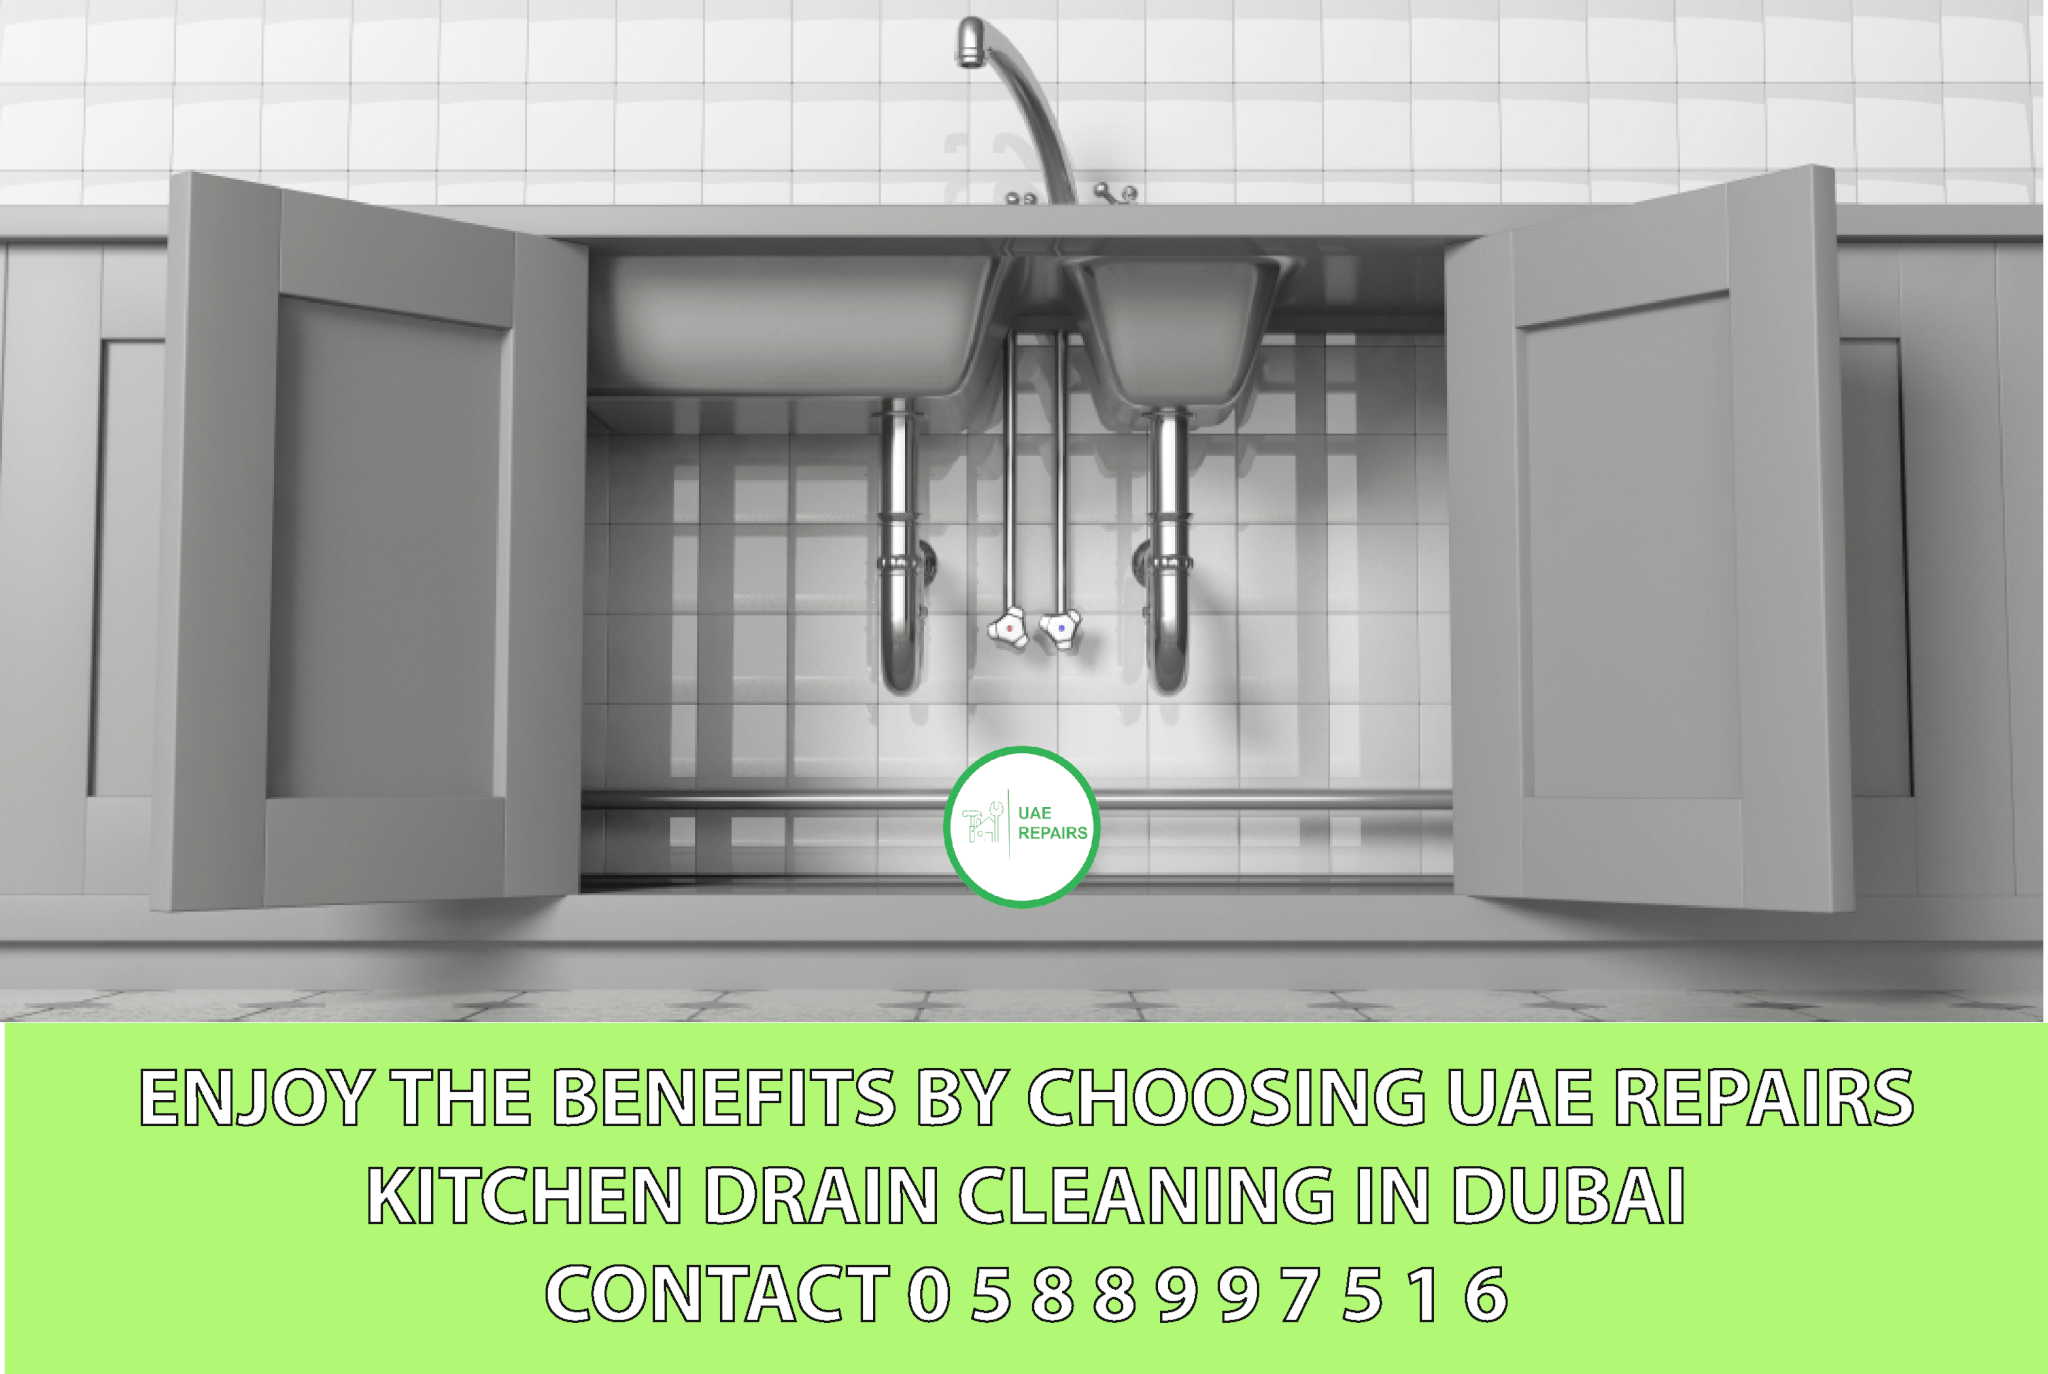 Enjoy Benefits by Choosing UAE REPAIRS for Kitchen Drain Cleaning in Dubai